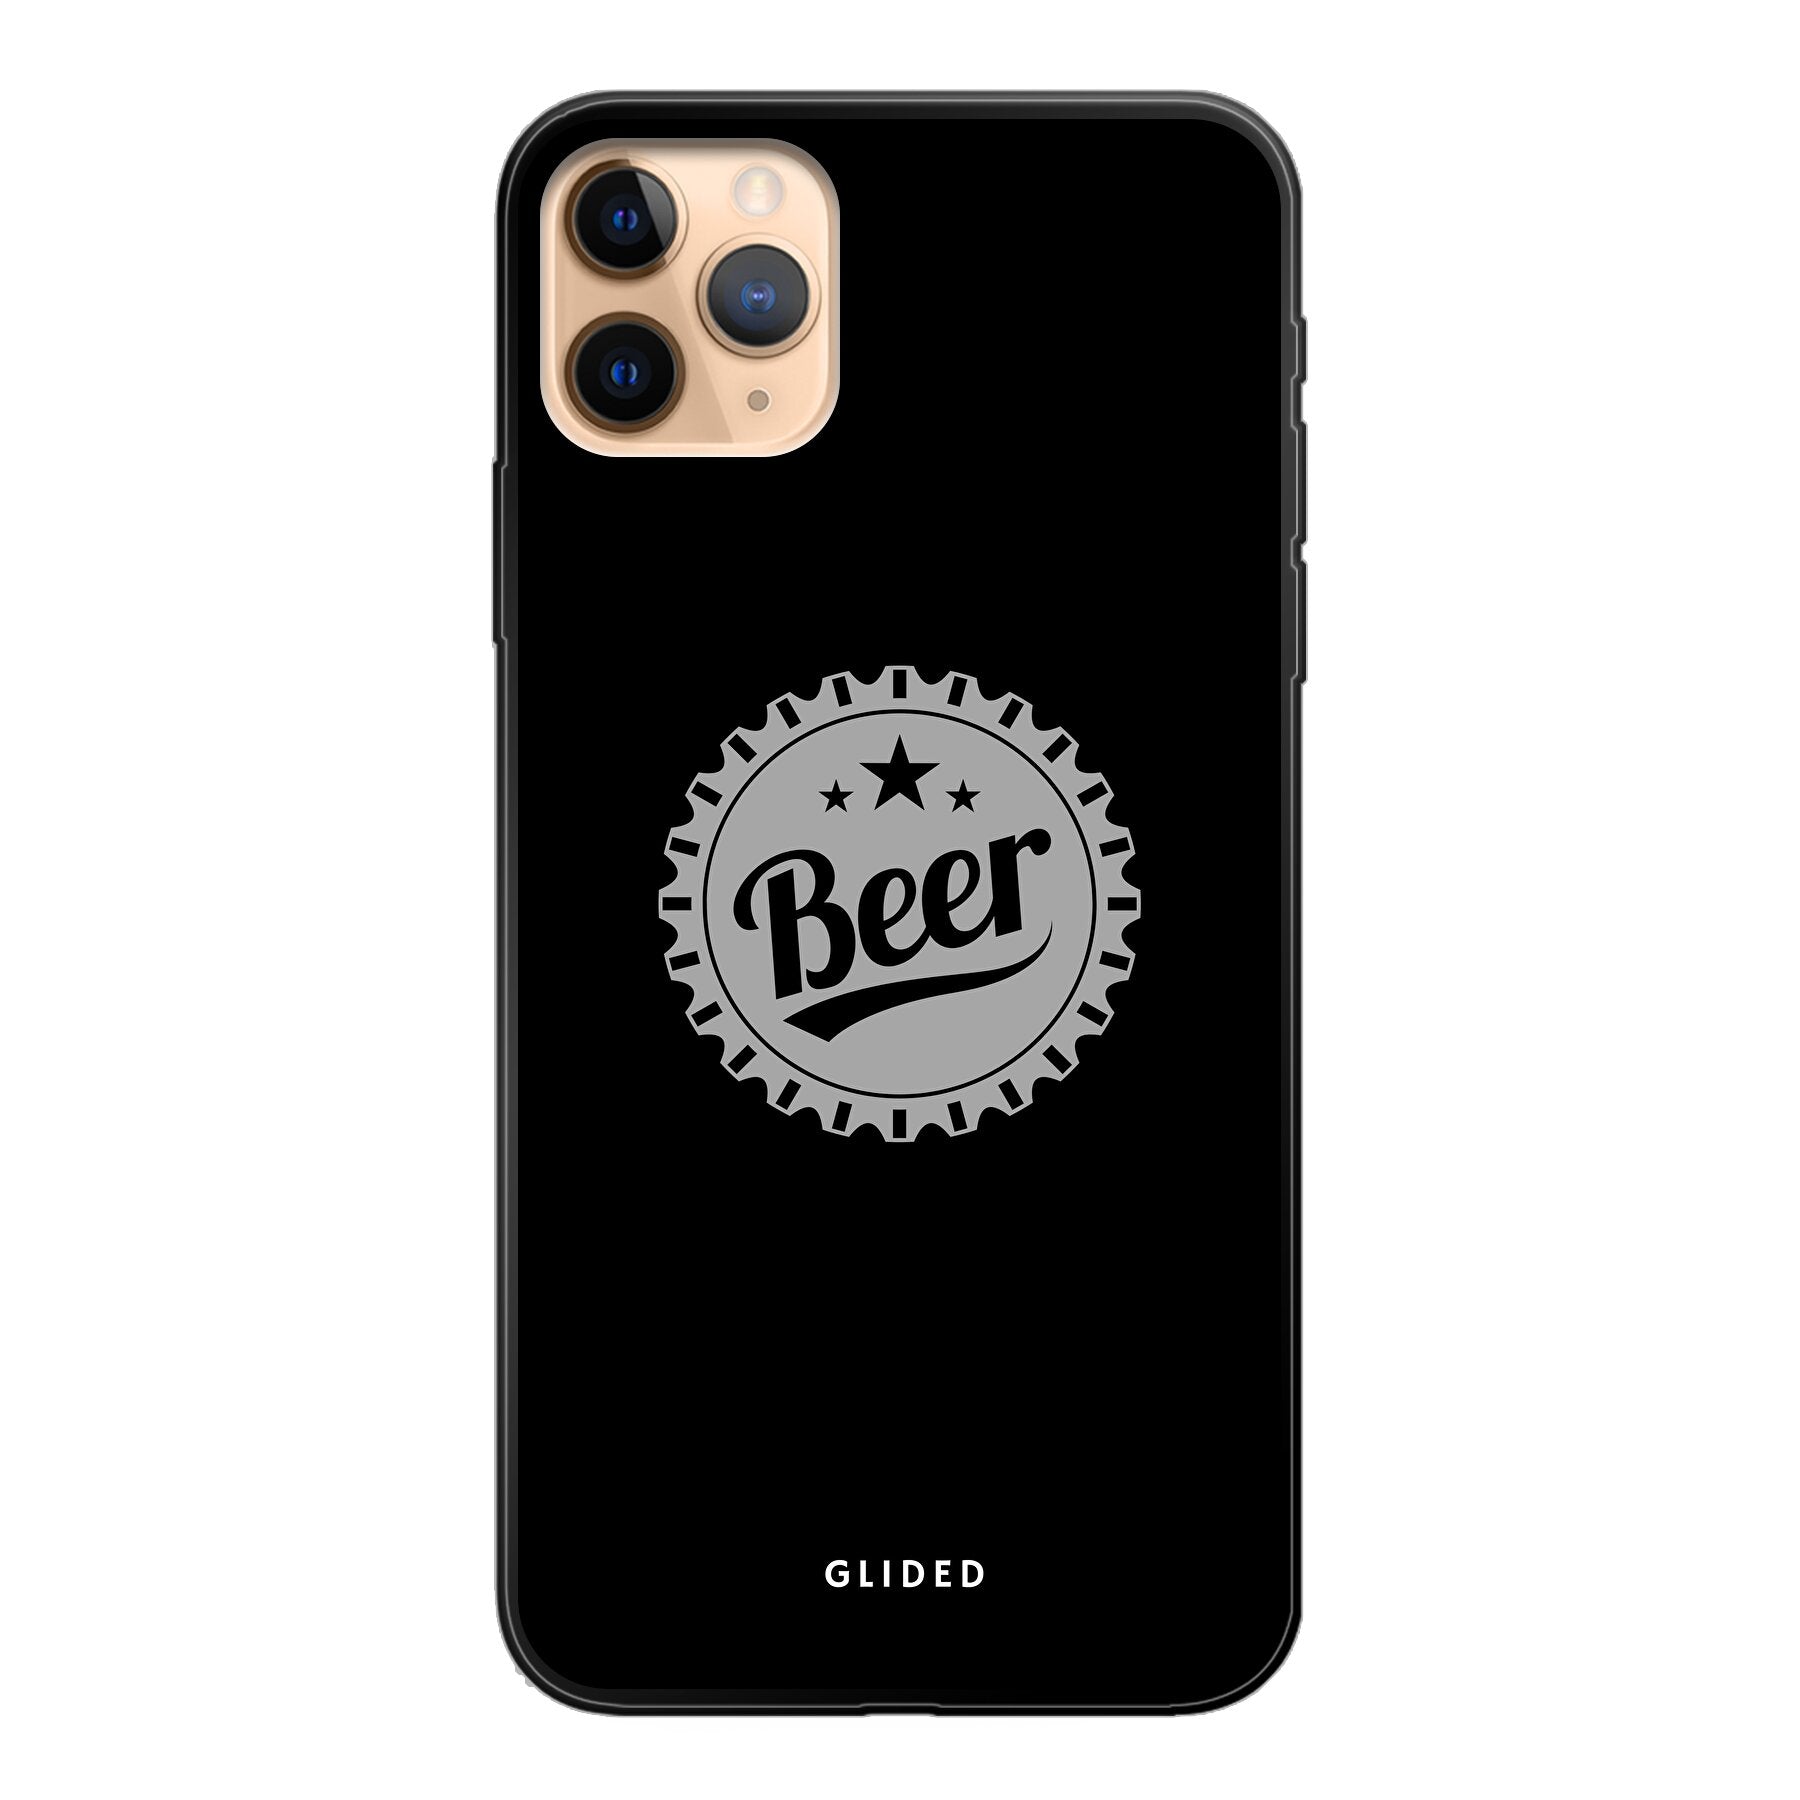 Cheers - iPhone 11 Pro Max - Soft case